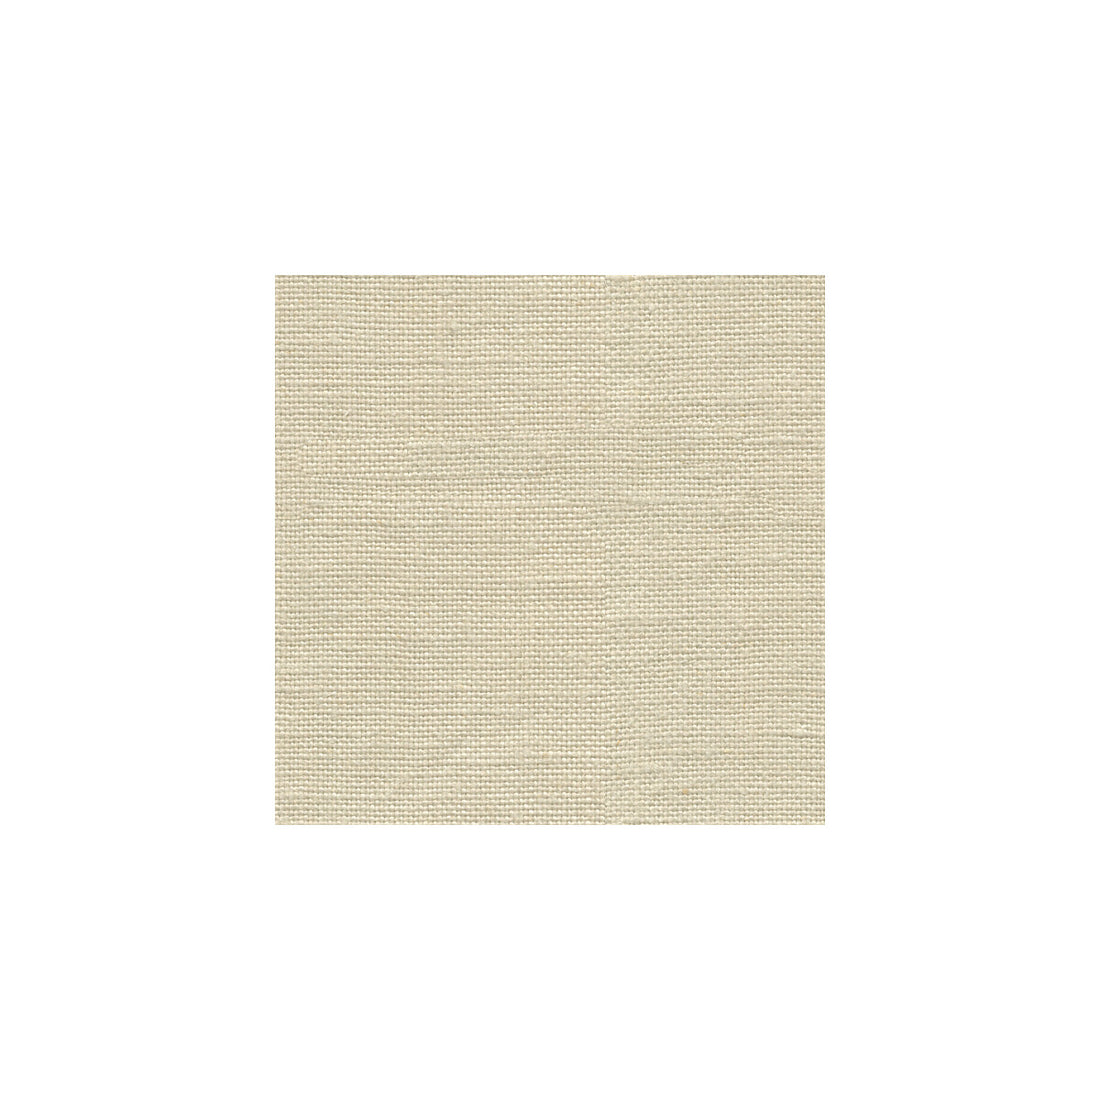 Madison Linen fabric in cream color - pattern 32330.111.0 - by Kravet Design in the Gis collection